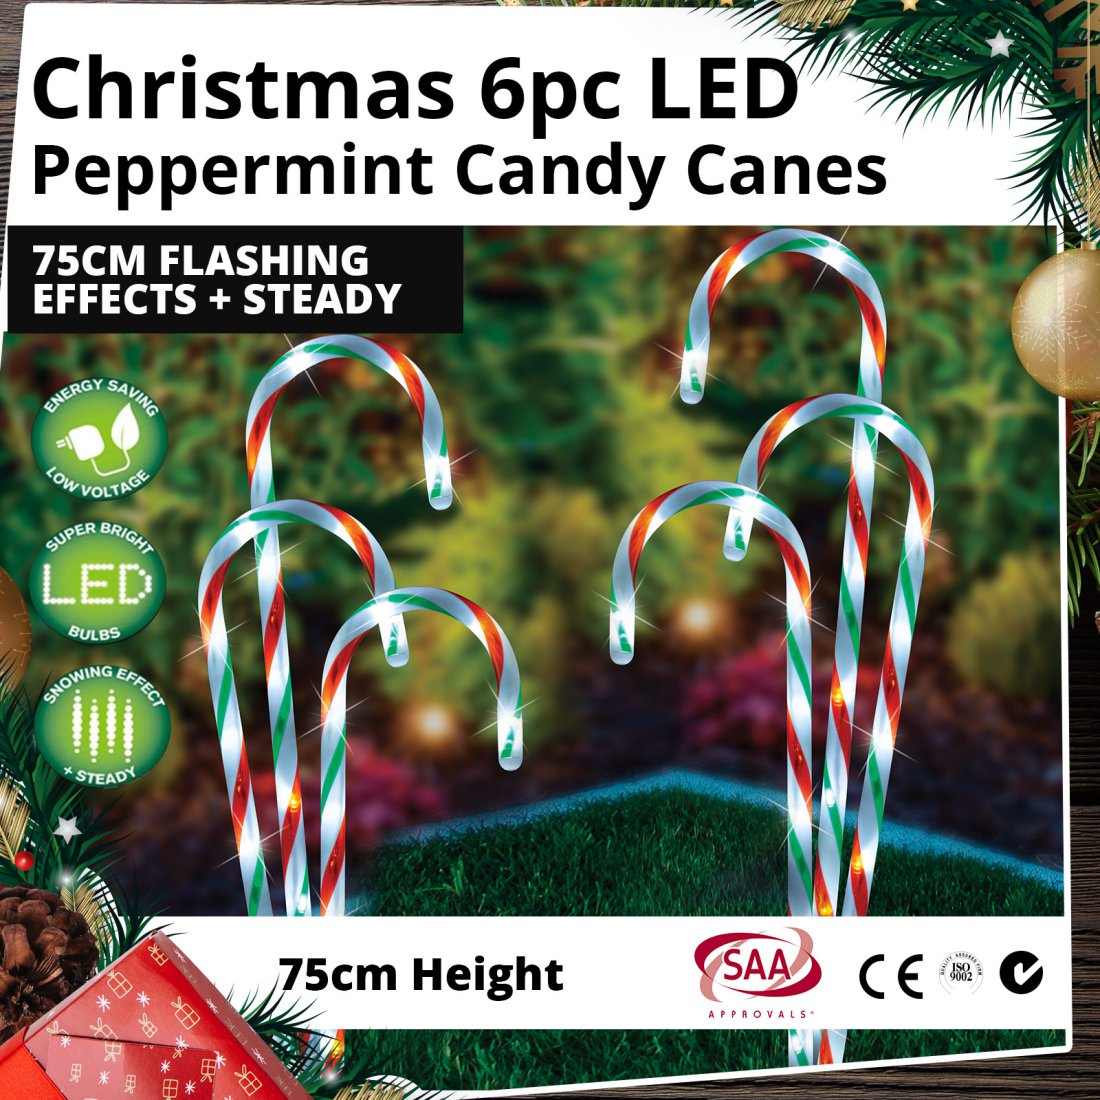 Christmas 6pc LED Peppermint Candy Canes 75cm Flashing Effects + Steady